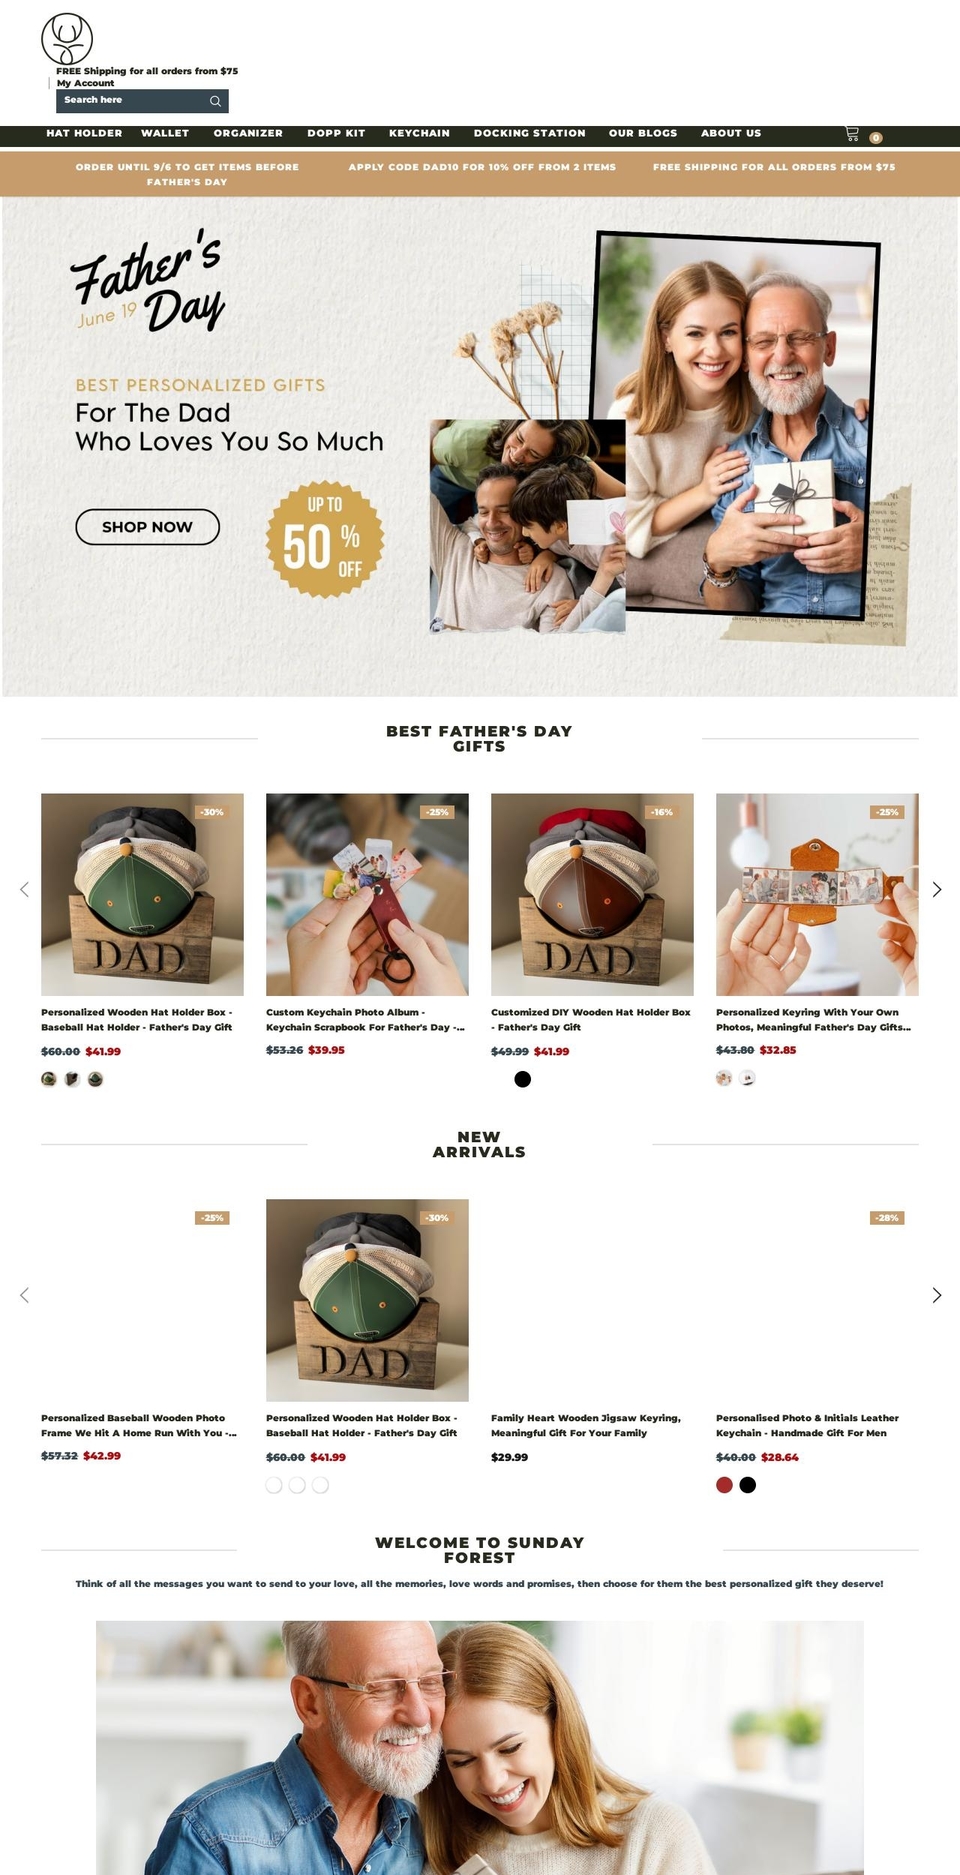 Gifts Shopify theme site example sundayforest.com